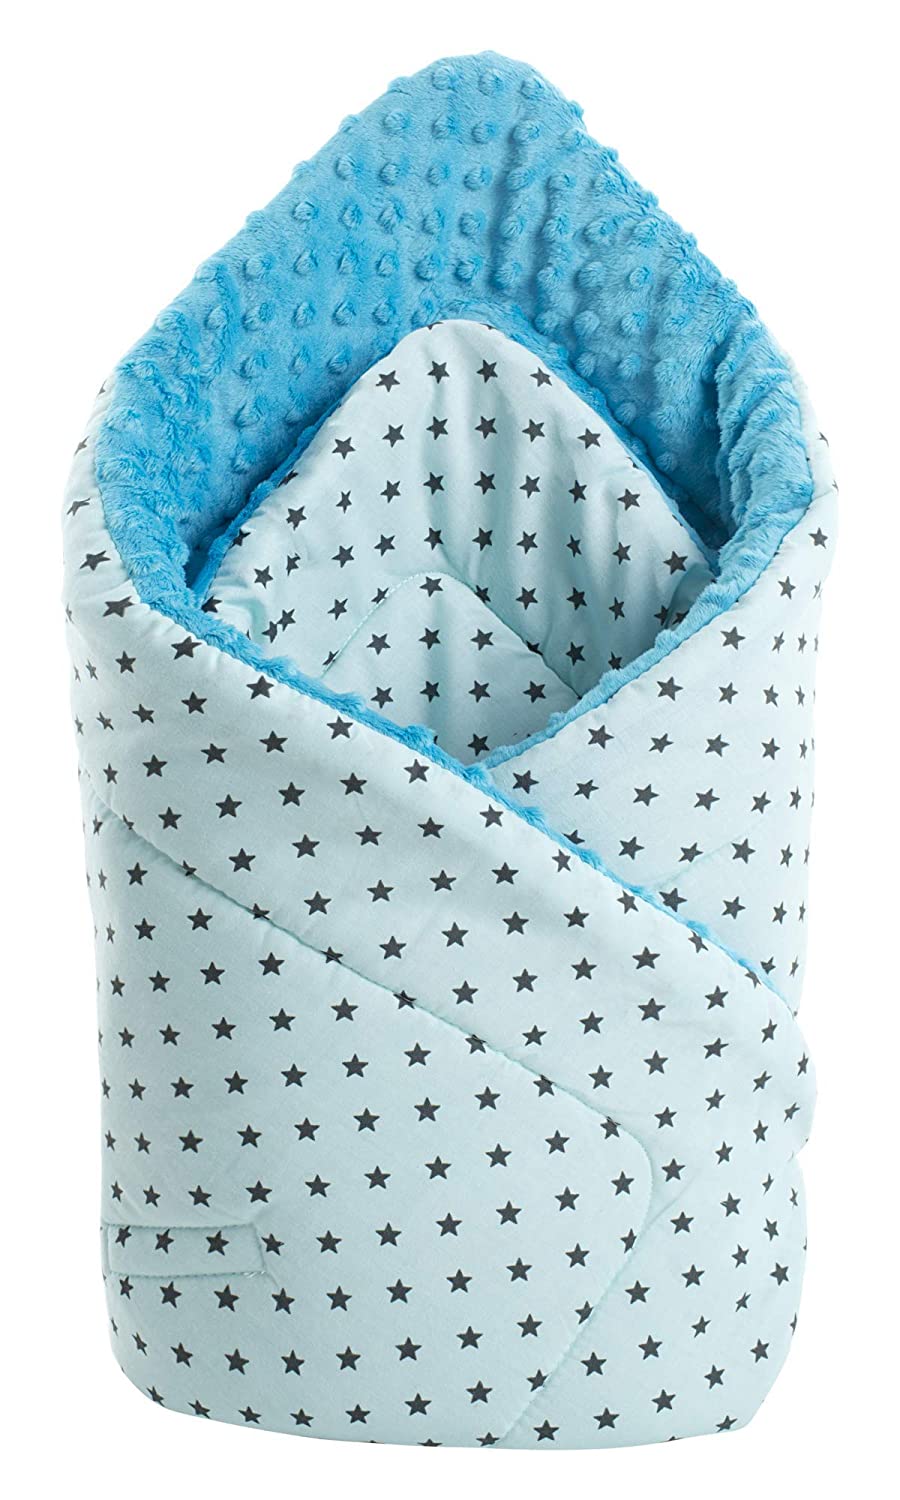 Medi Partners Swaddling Blanket 100% Cotton 75 x 75 cm Baby Pillow Double Sided Soft All Year Round Multifunctional Anti-Allergic Babies Medi Partners (Black Stars with Turquoise Minky)